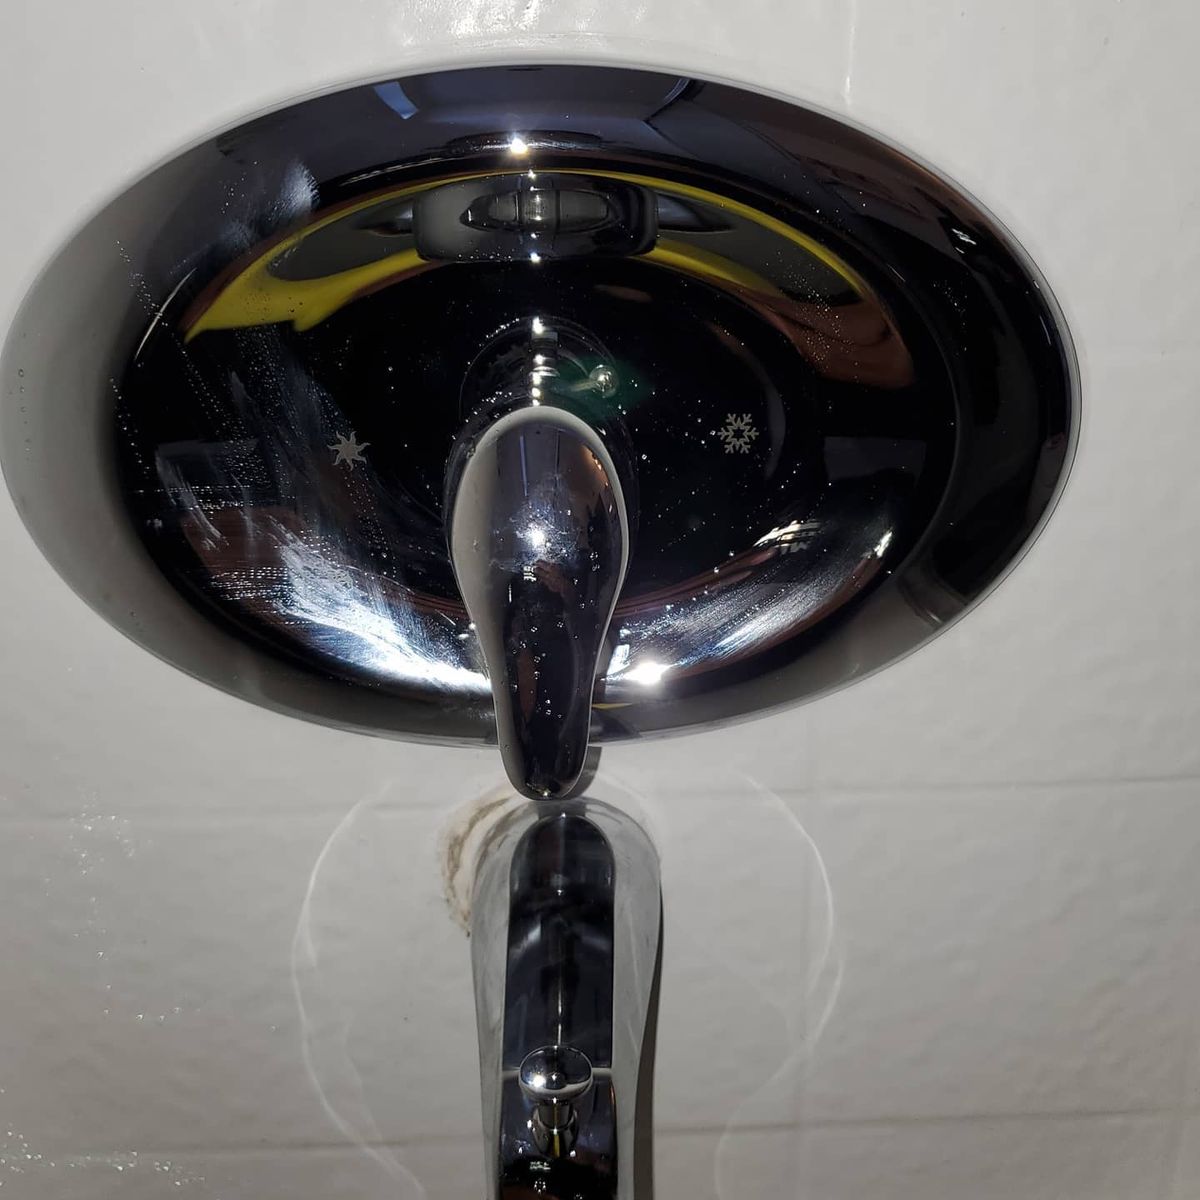 Faucet Repairs for A-Team Plumbing Services, Inc. in Los Angeles, CA